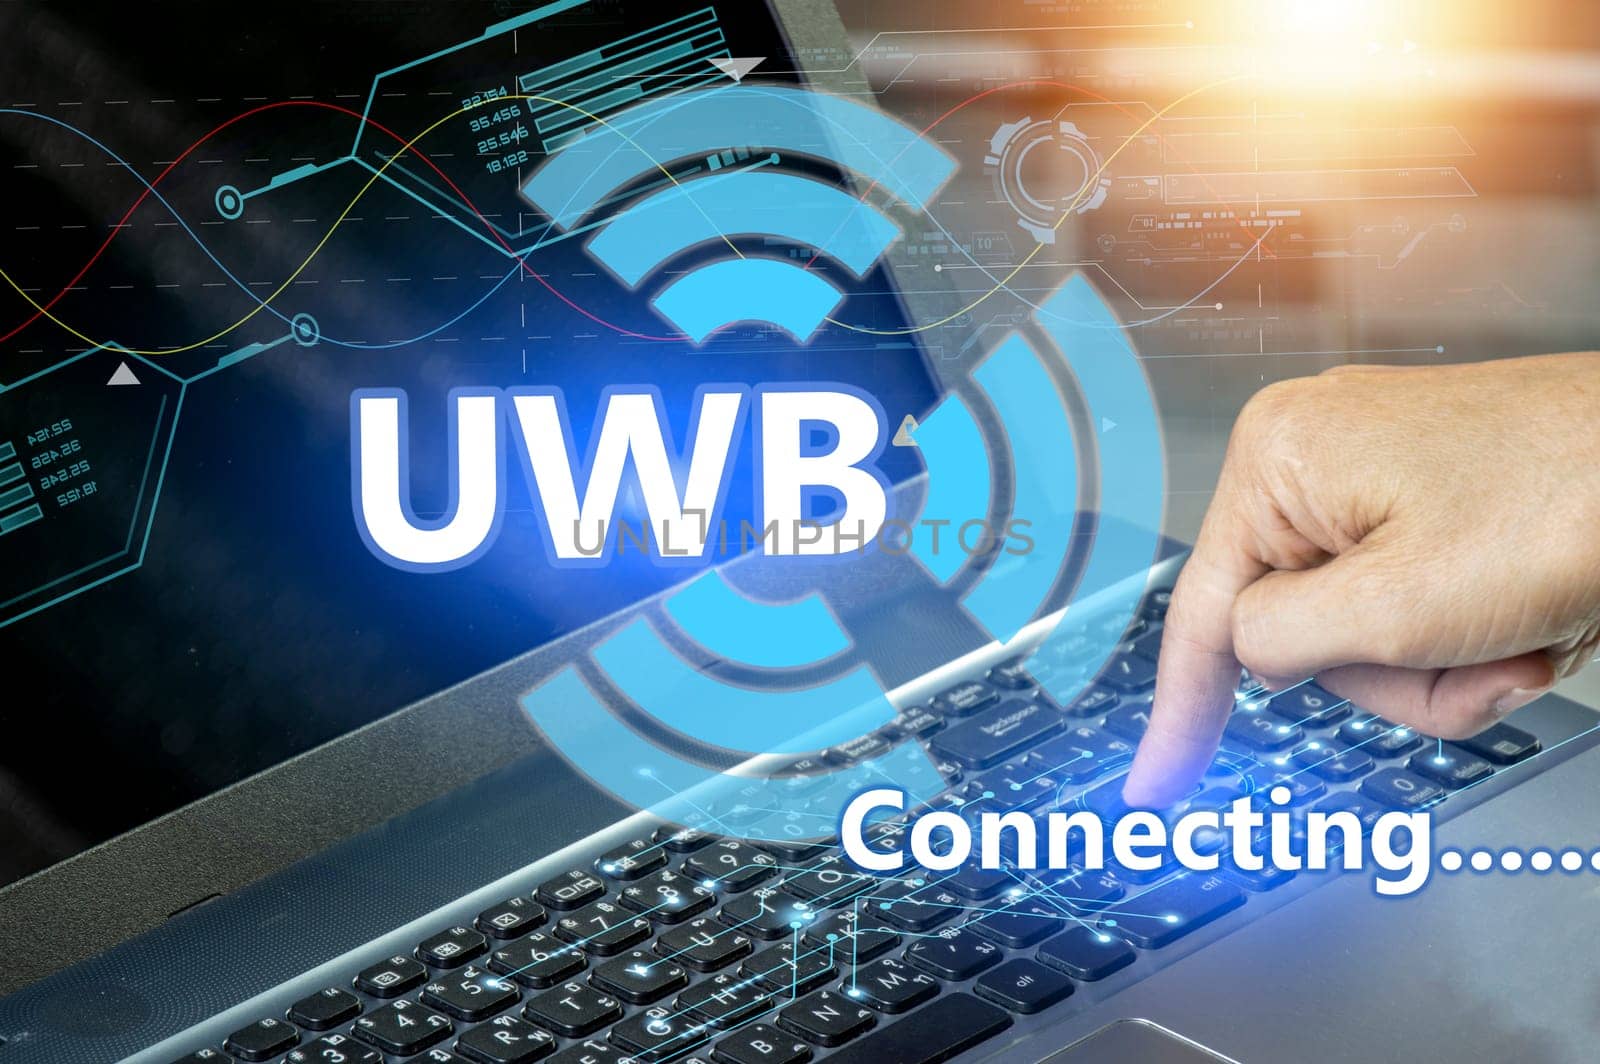 Ultra-wideband UWB is a short-range radio communication technology on bandwidths of 500MHz or greater and at very high frequencies. Overall, it works similarly to Bluetooth and Wi-Fi(not a trademark) by boonruen